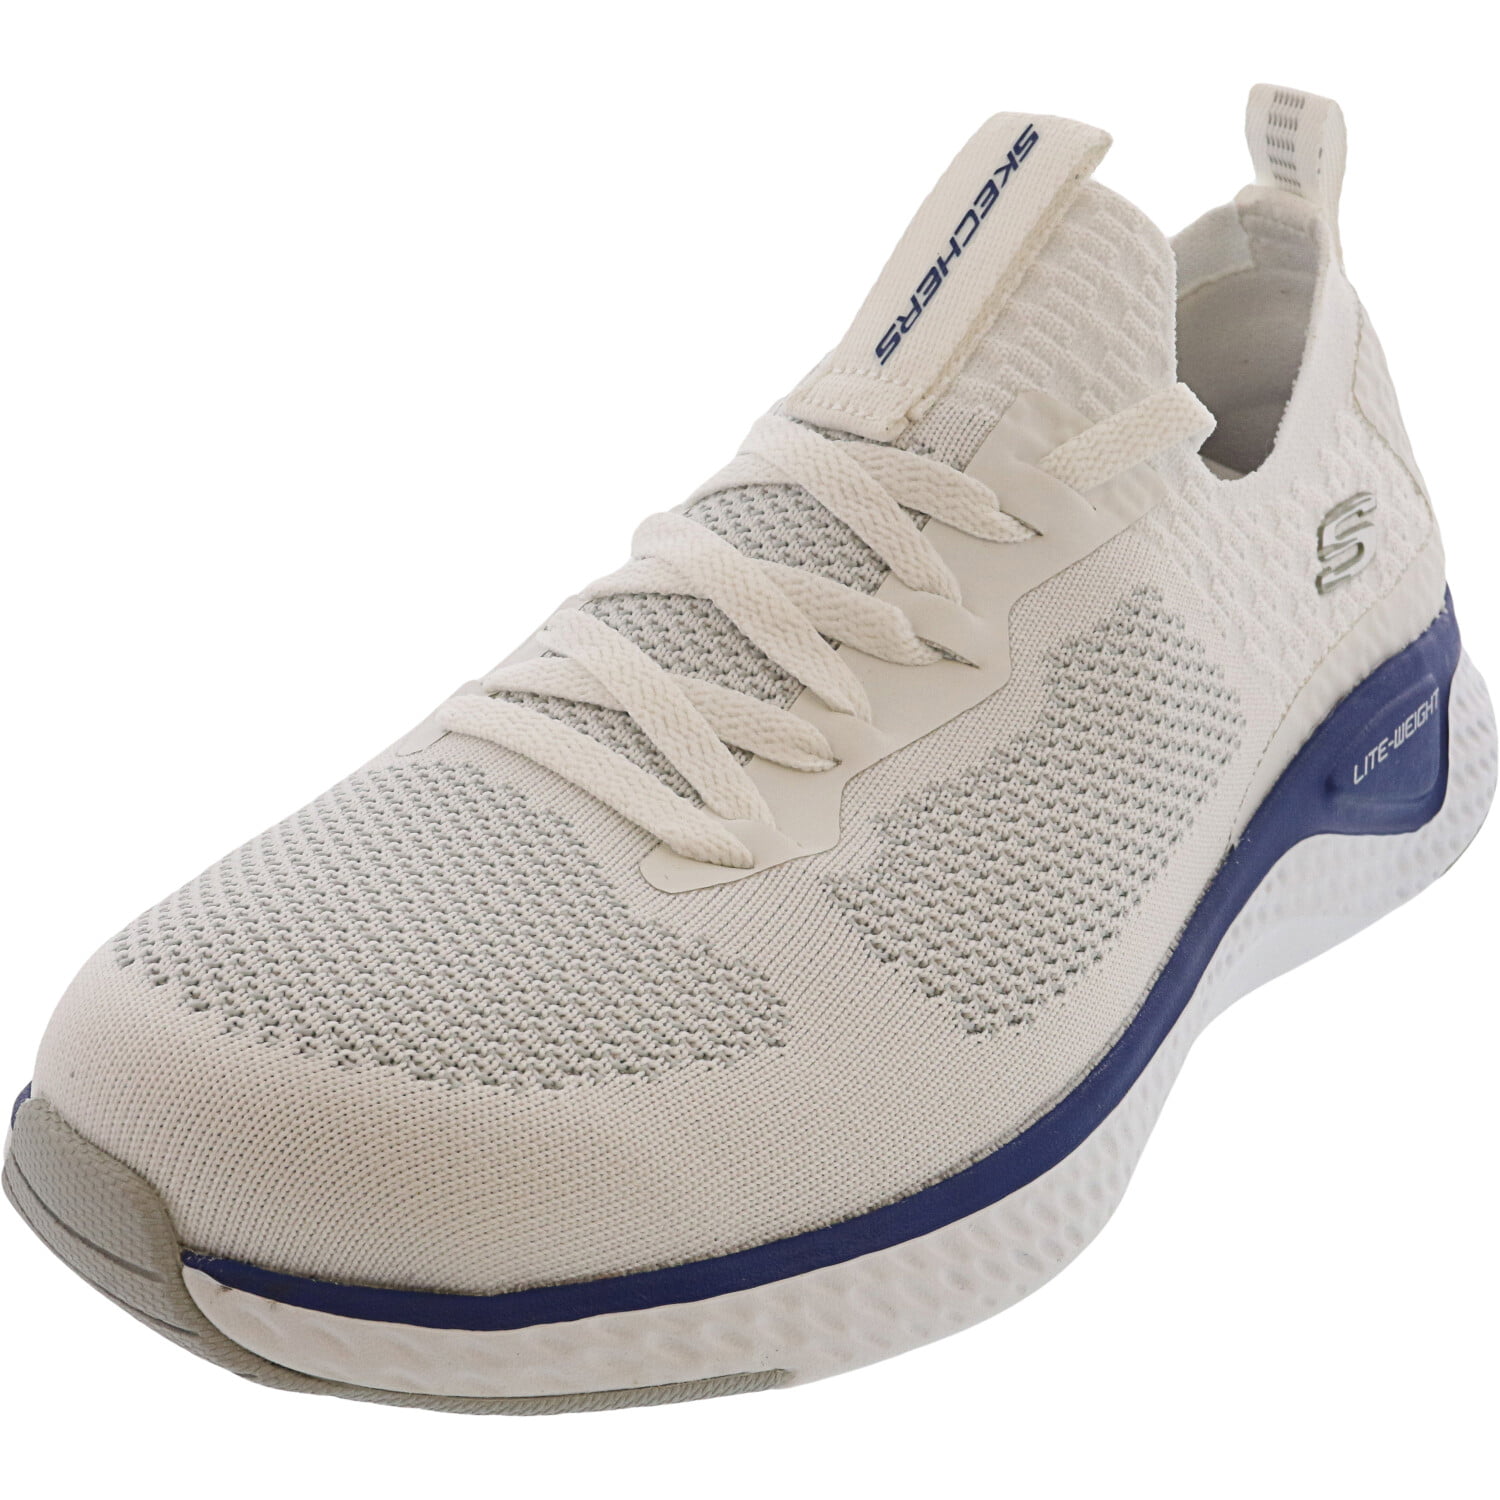 white and blue skechers